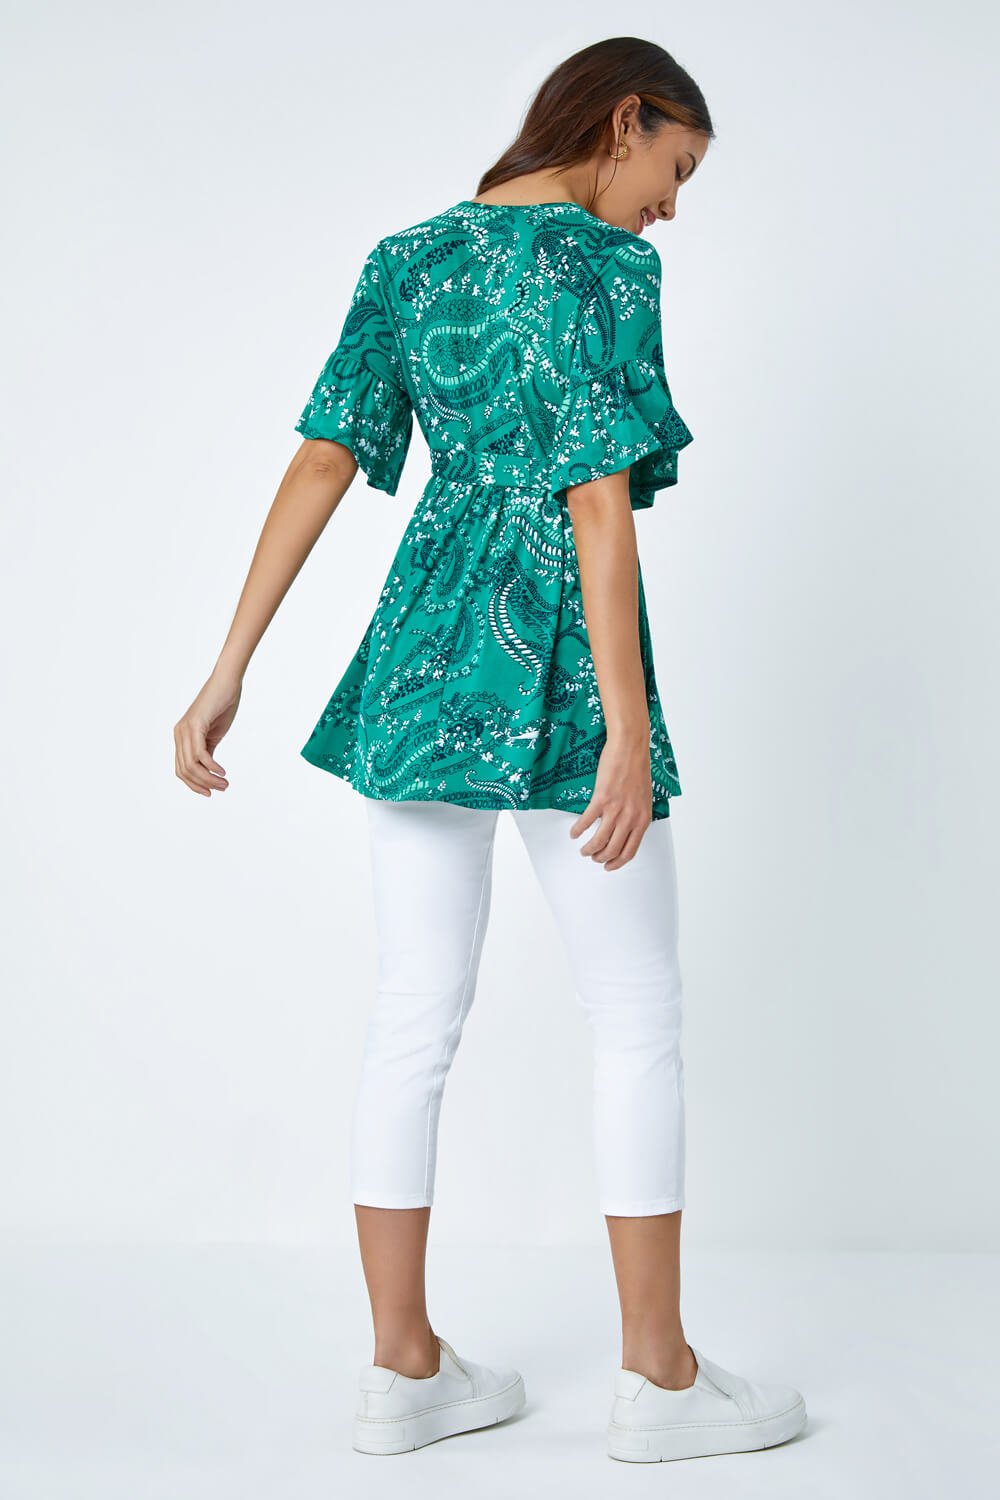 Green Paisley Print Stretch Jersey Wrap Top, Image 3 of 5